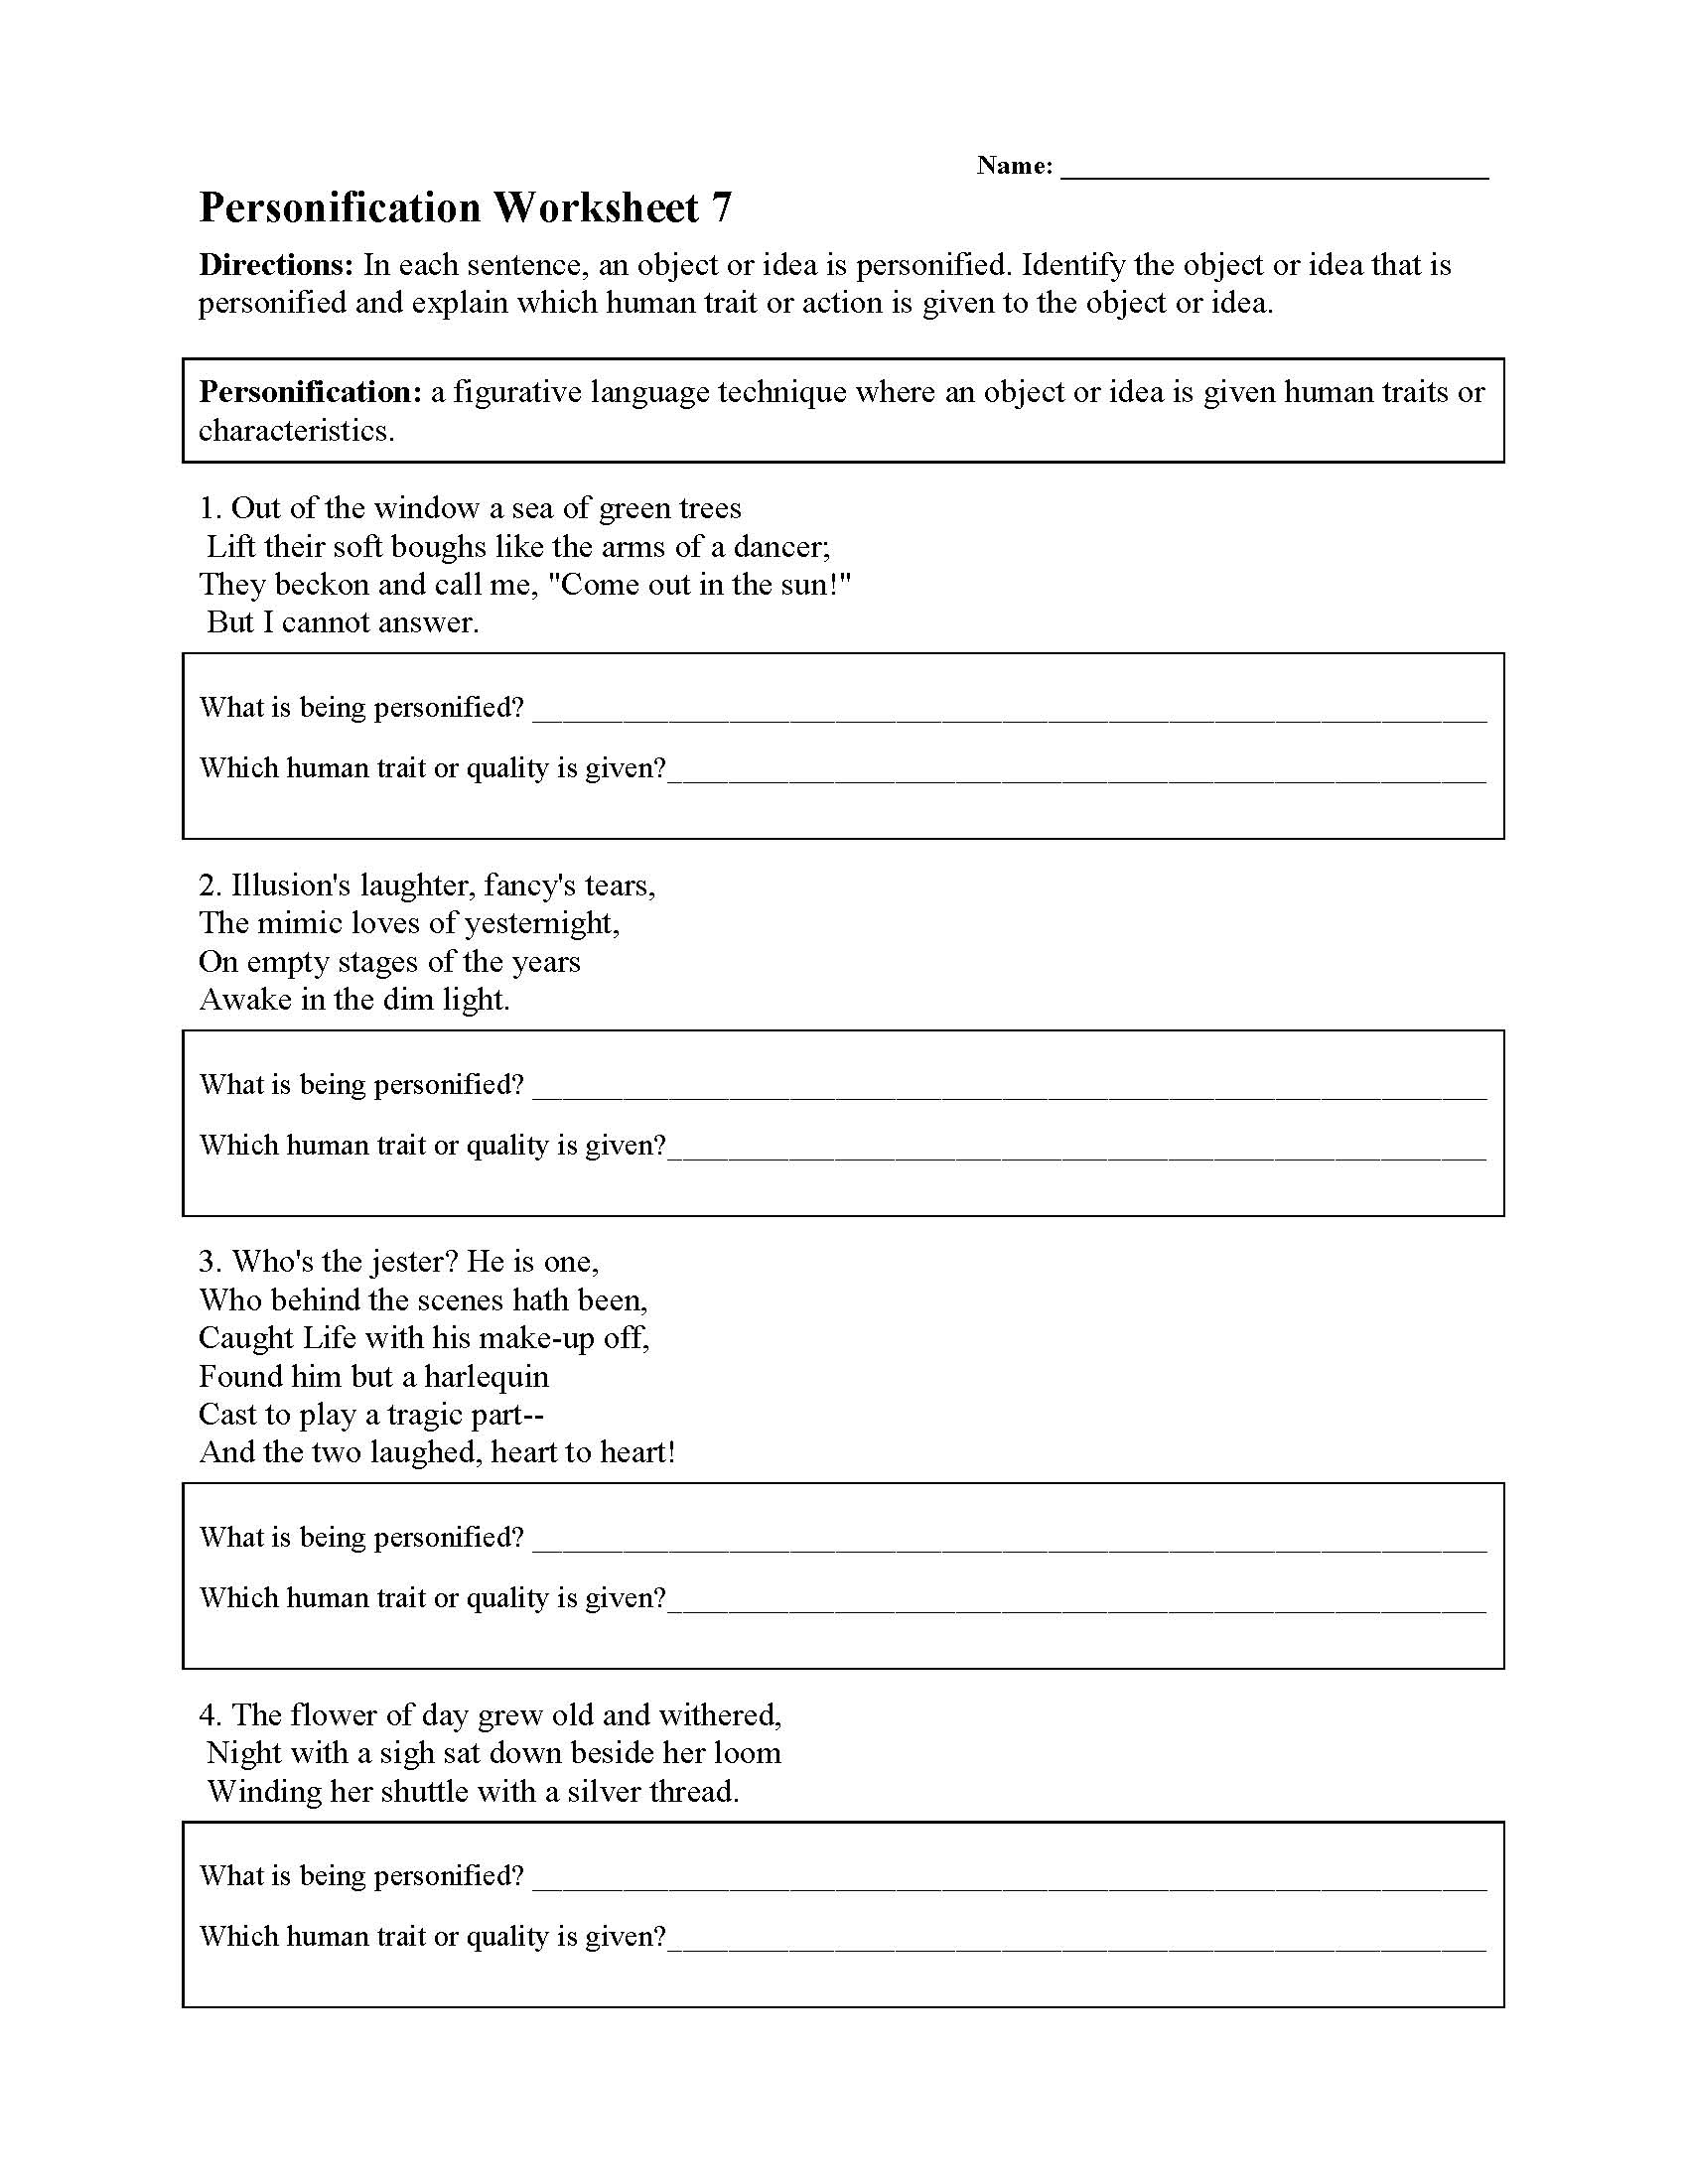 personification-worksheet-7-preview